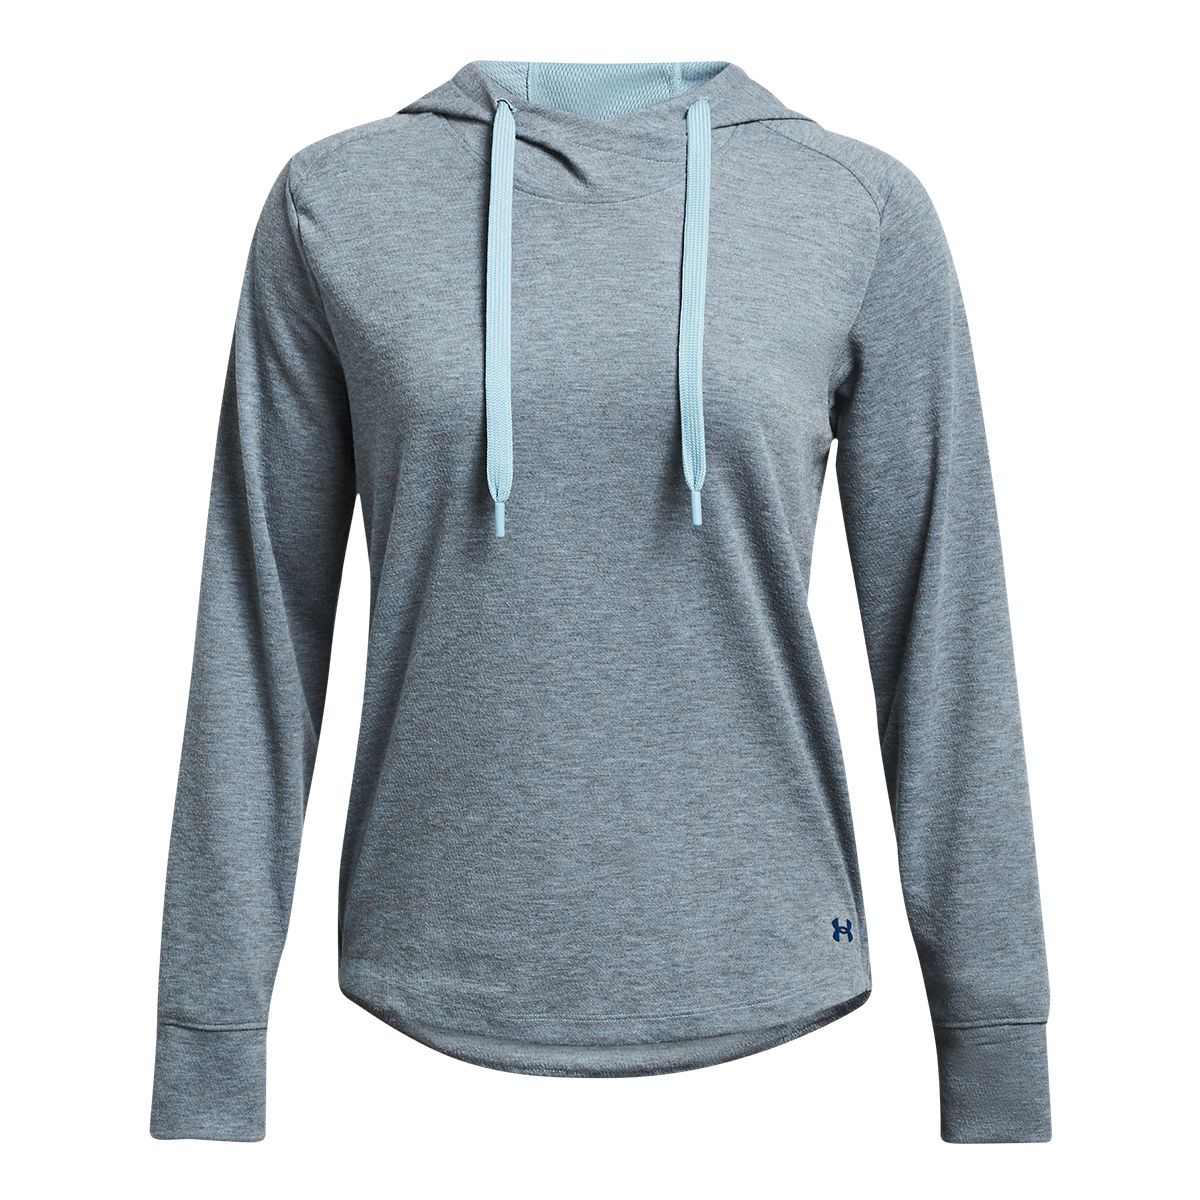 https://media-www.sportchek.ca/product/div-03-softgoods/dpt-72-casual-clothing/sdpt-02-womens/334161223/under-armour-women-s-coldgear-infrared-hoodie-39bf0c59-5e42-4ab3-9656-08c7f396ba43-jpgrendition.jpg